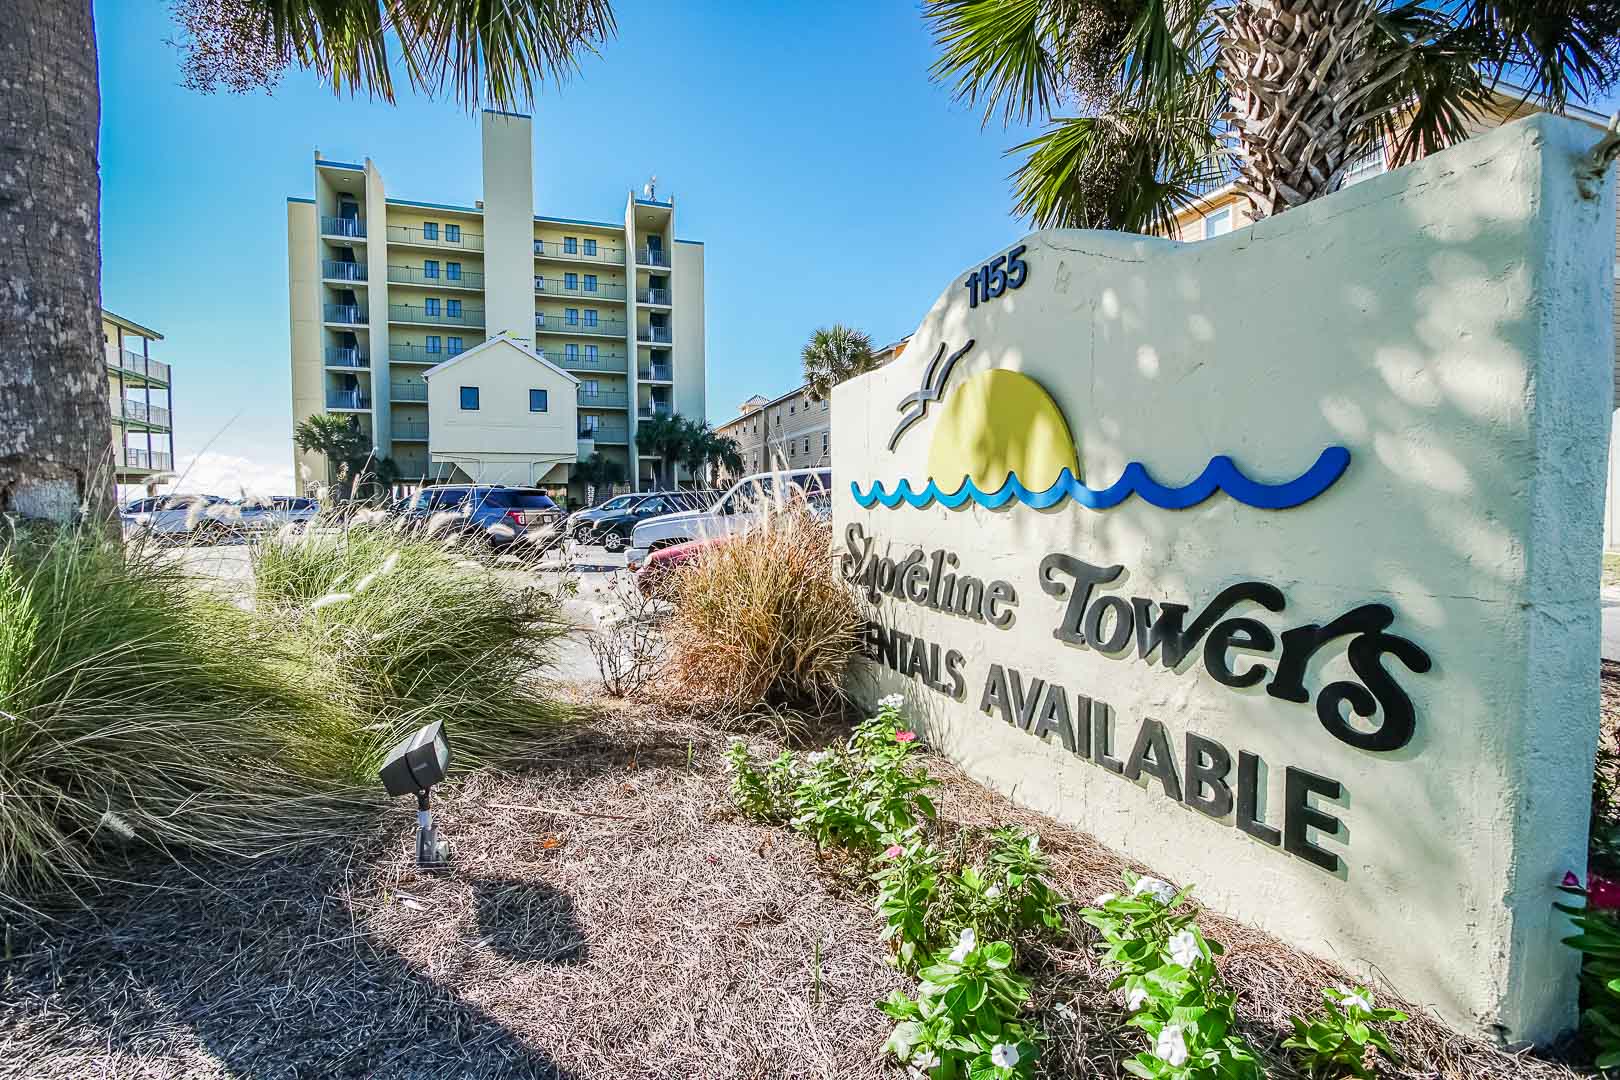 A beautiful resort entrance and signage at VRI's Shoreline Towers in Gulf Shores, Alabama.